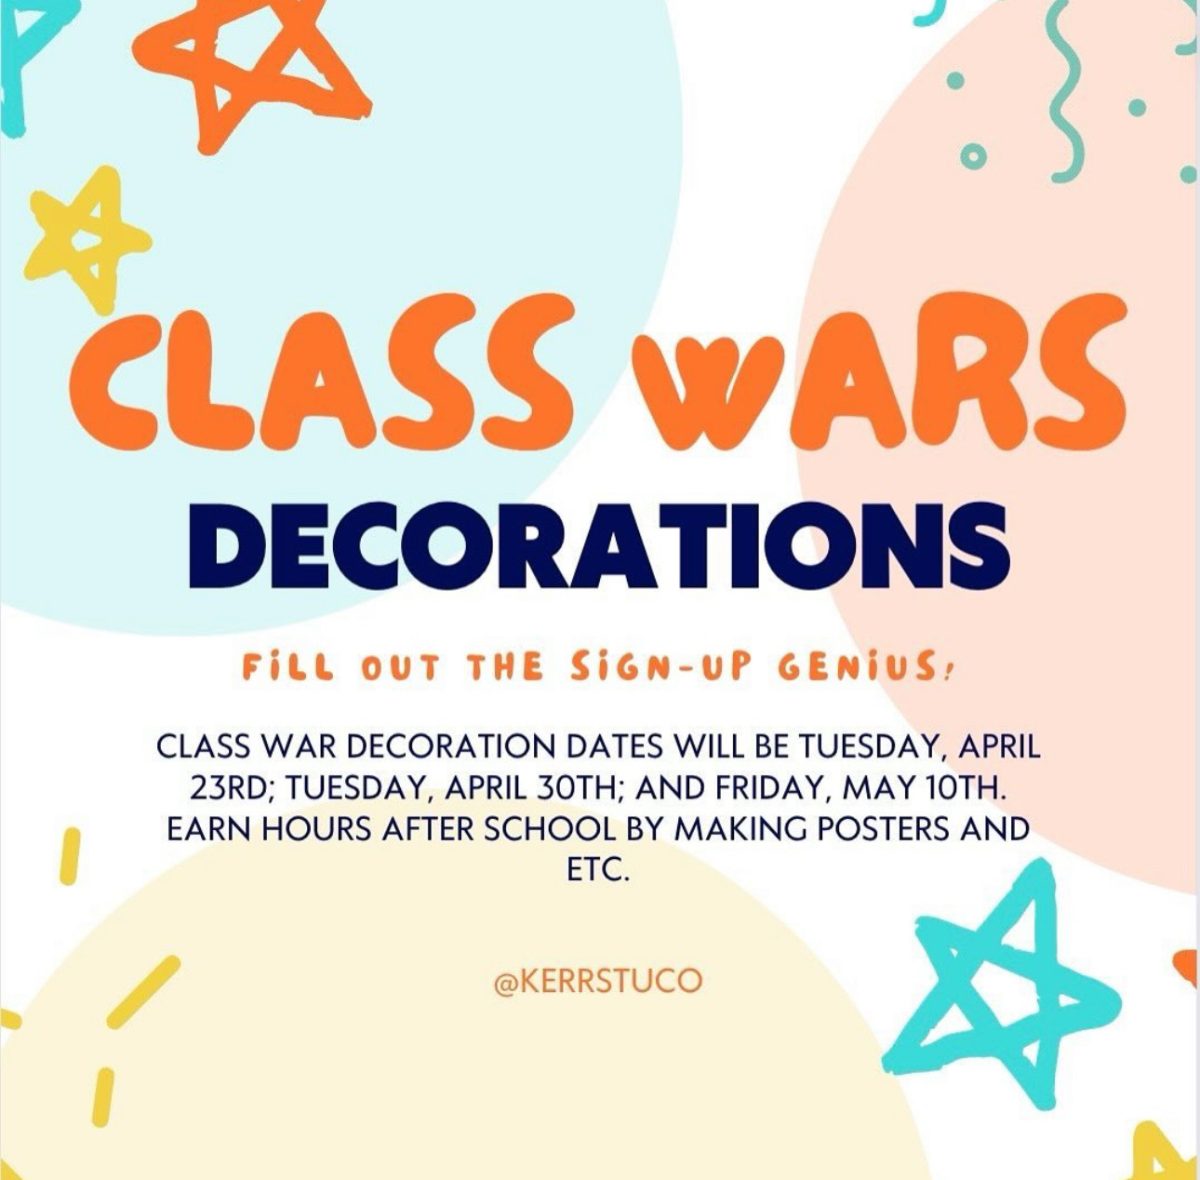 Class+Wars+Decorations%21+The+Student+Council+Officers+advertise+their+afterschool+dates+for+members+to+help+prepare+for+class+wars.+By+participating%2C+members+can+earn+STUCO+points+as+well+as+hours.